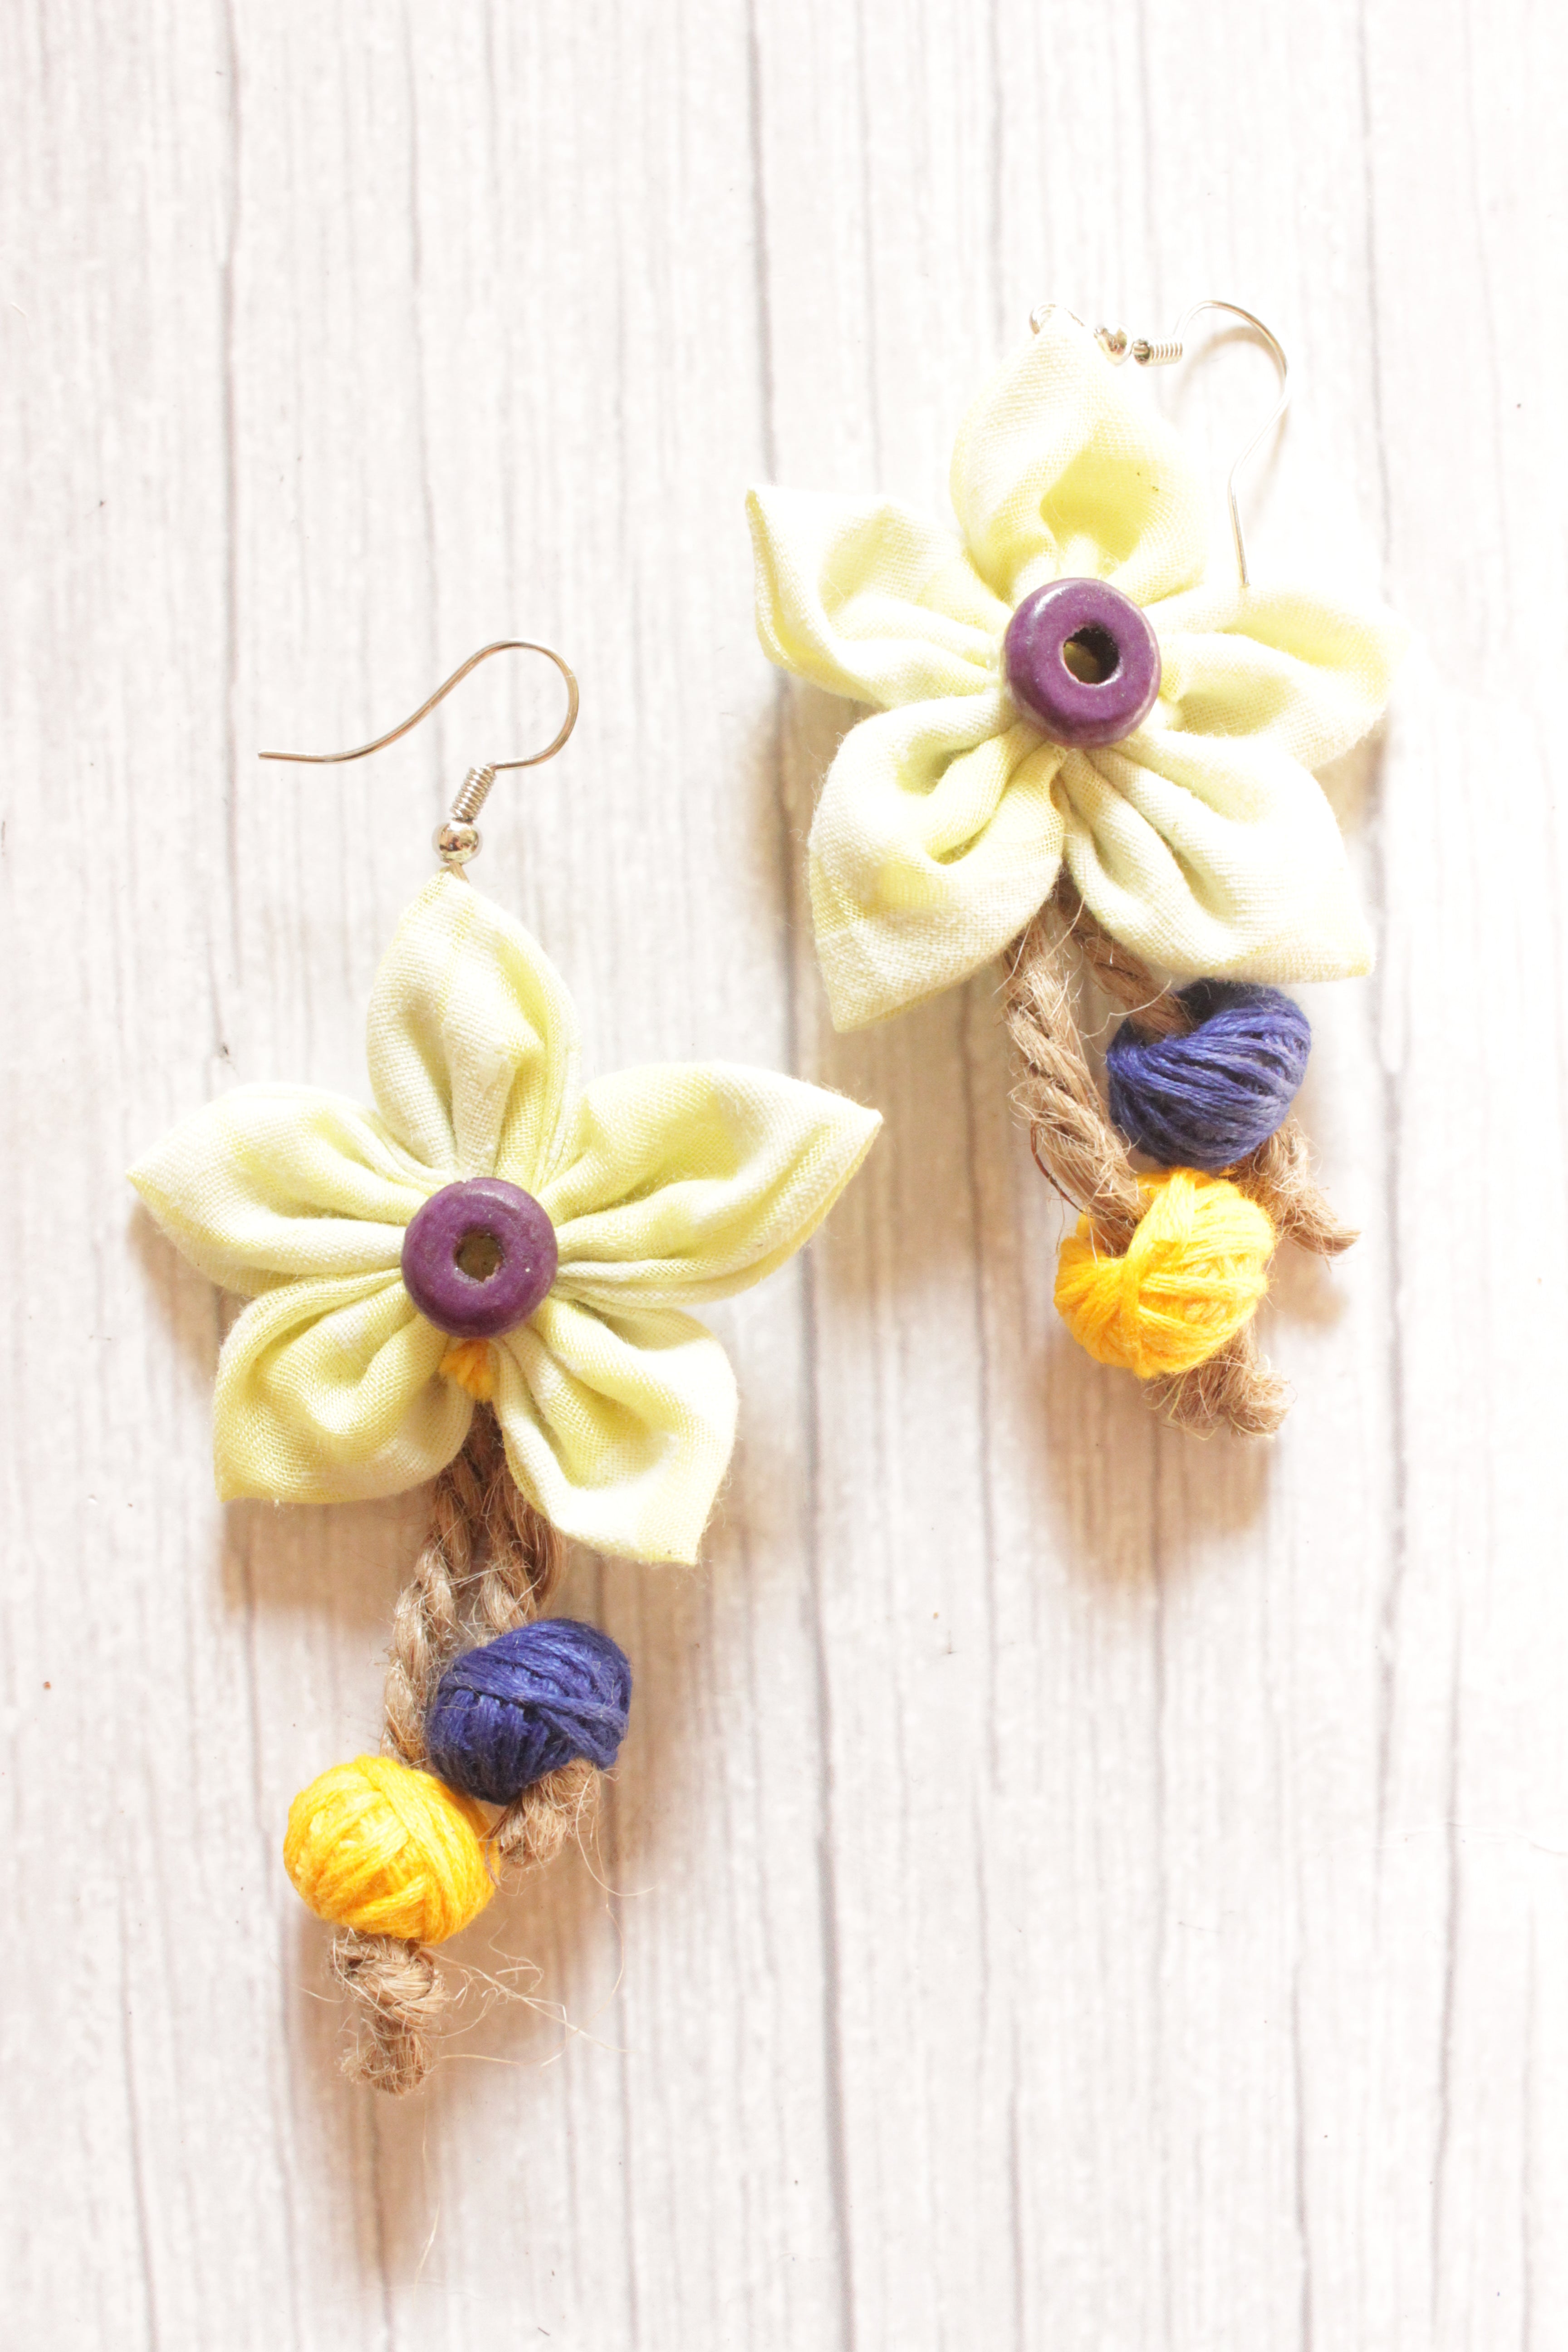 Lemon Yellow Handmade Fabric Flower Earrings Accentuated with Fabric Beads Attached to Jute Strings